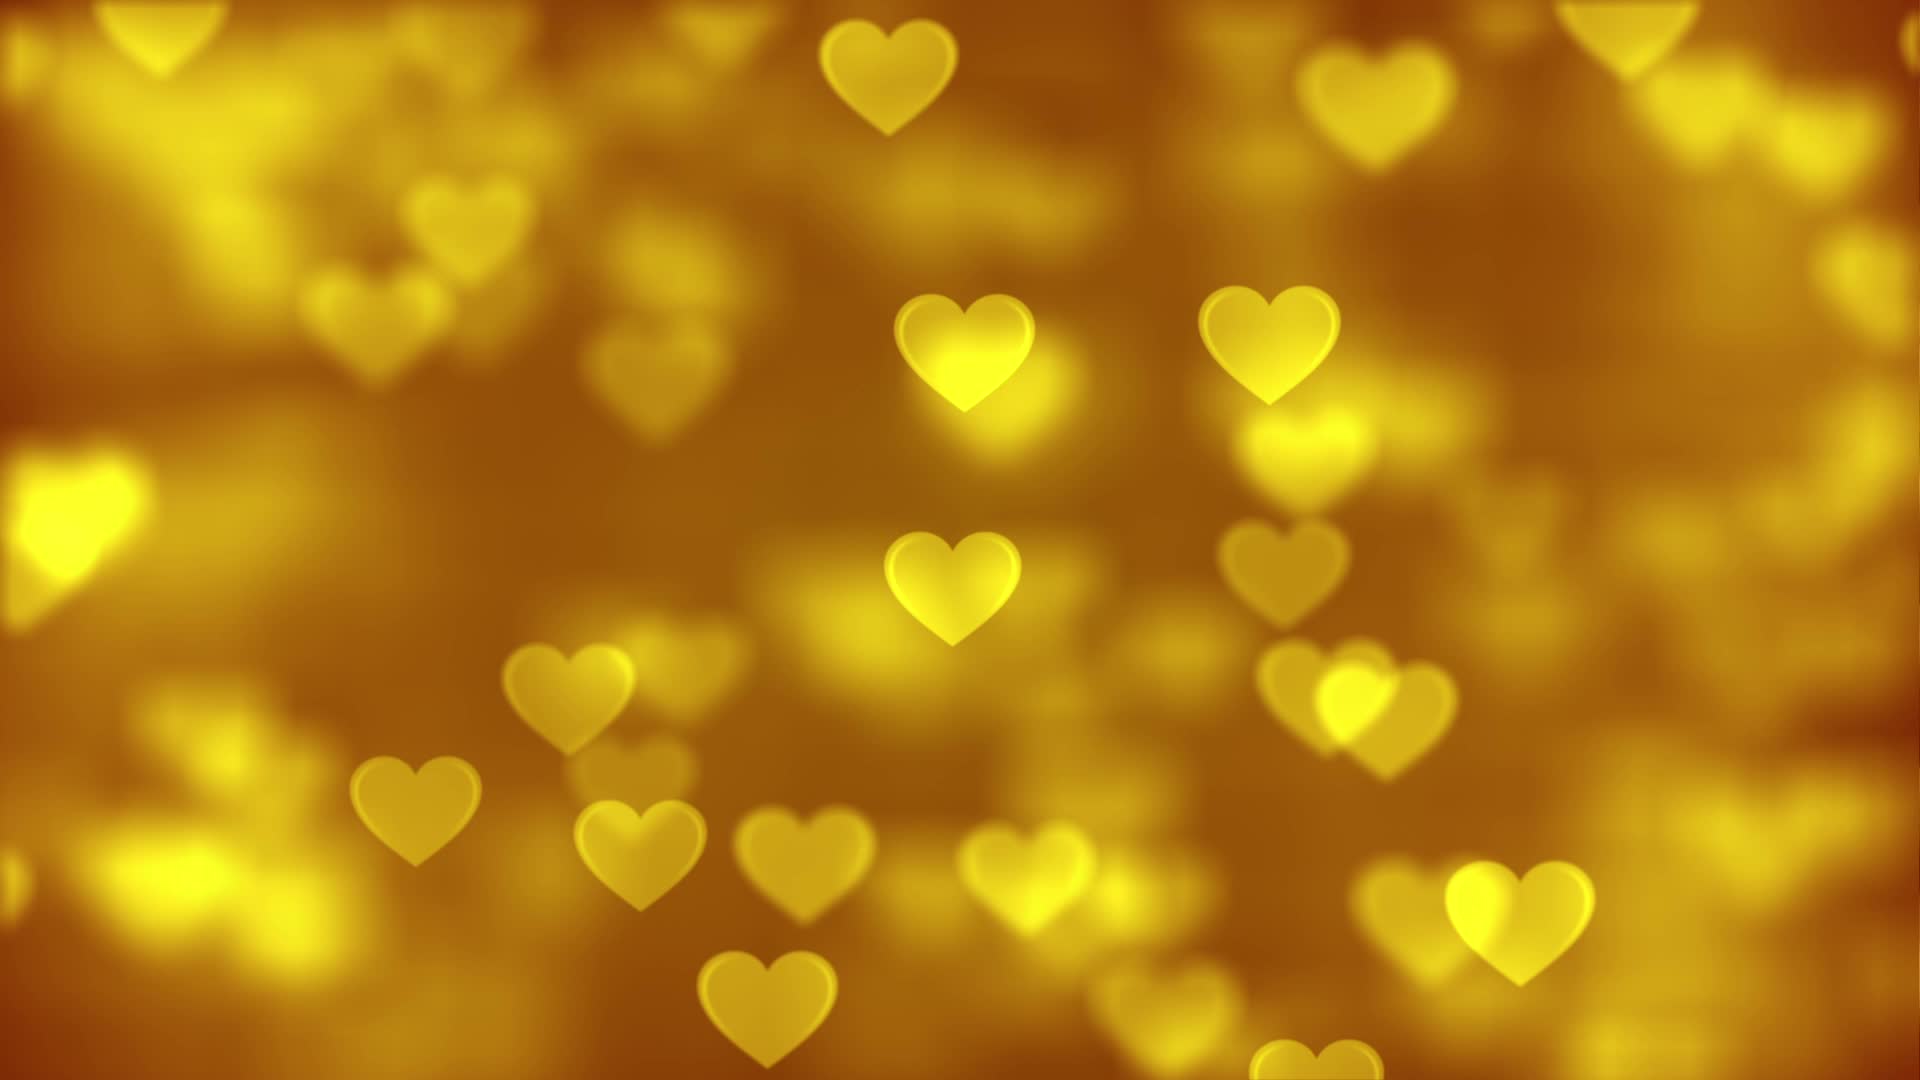 Yellow Hearts Stock Video Footage for Free Download